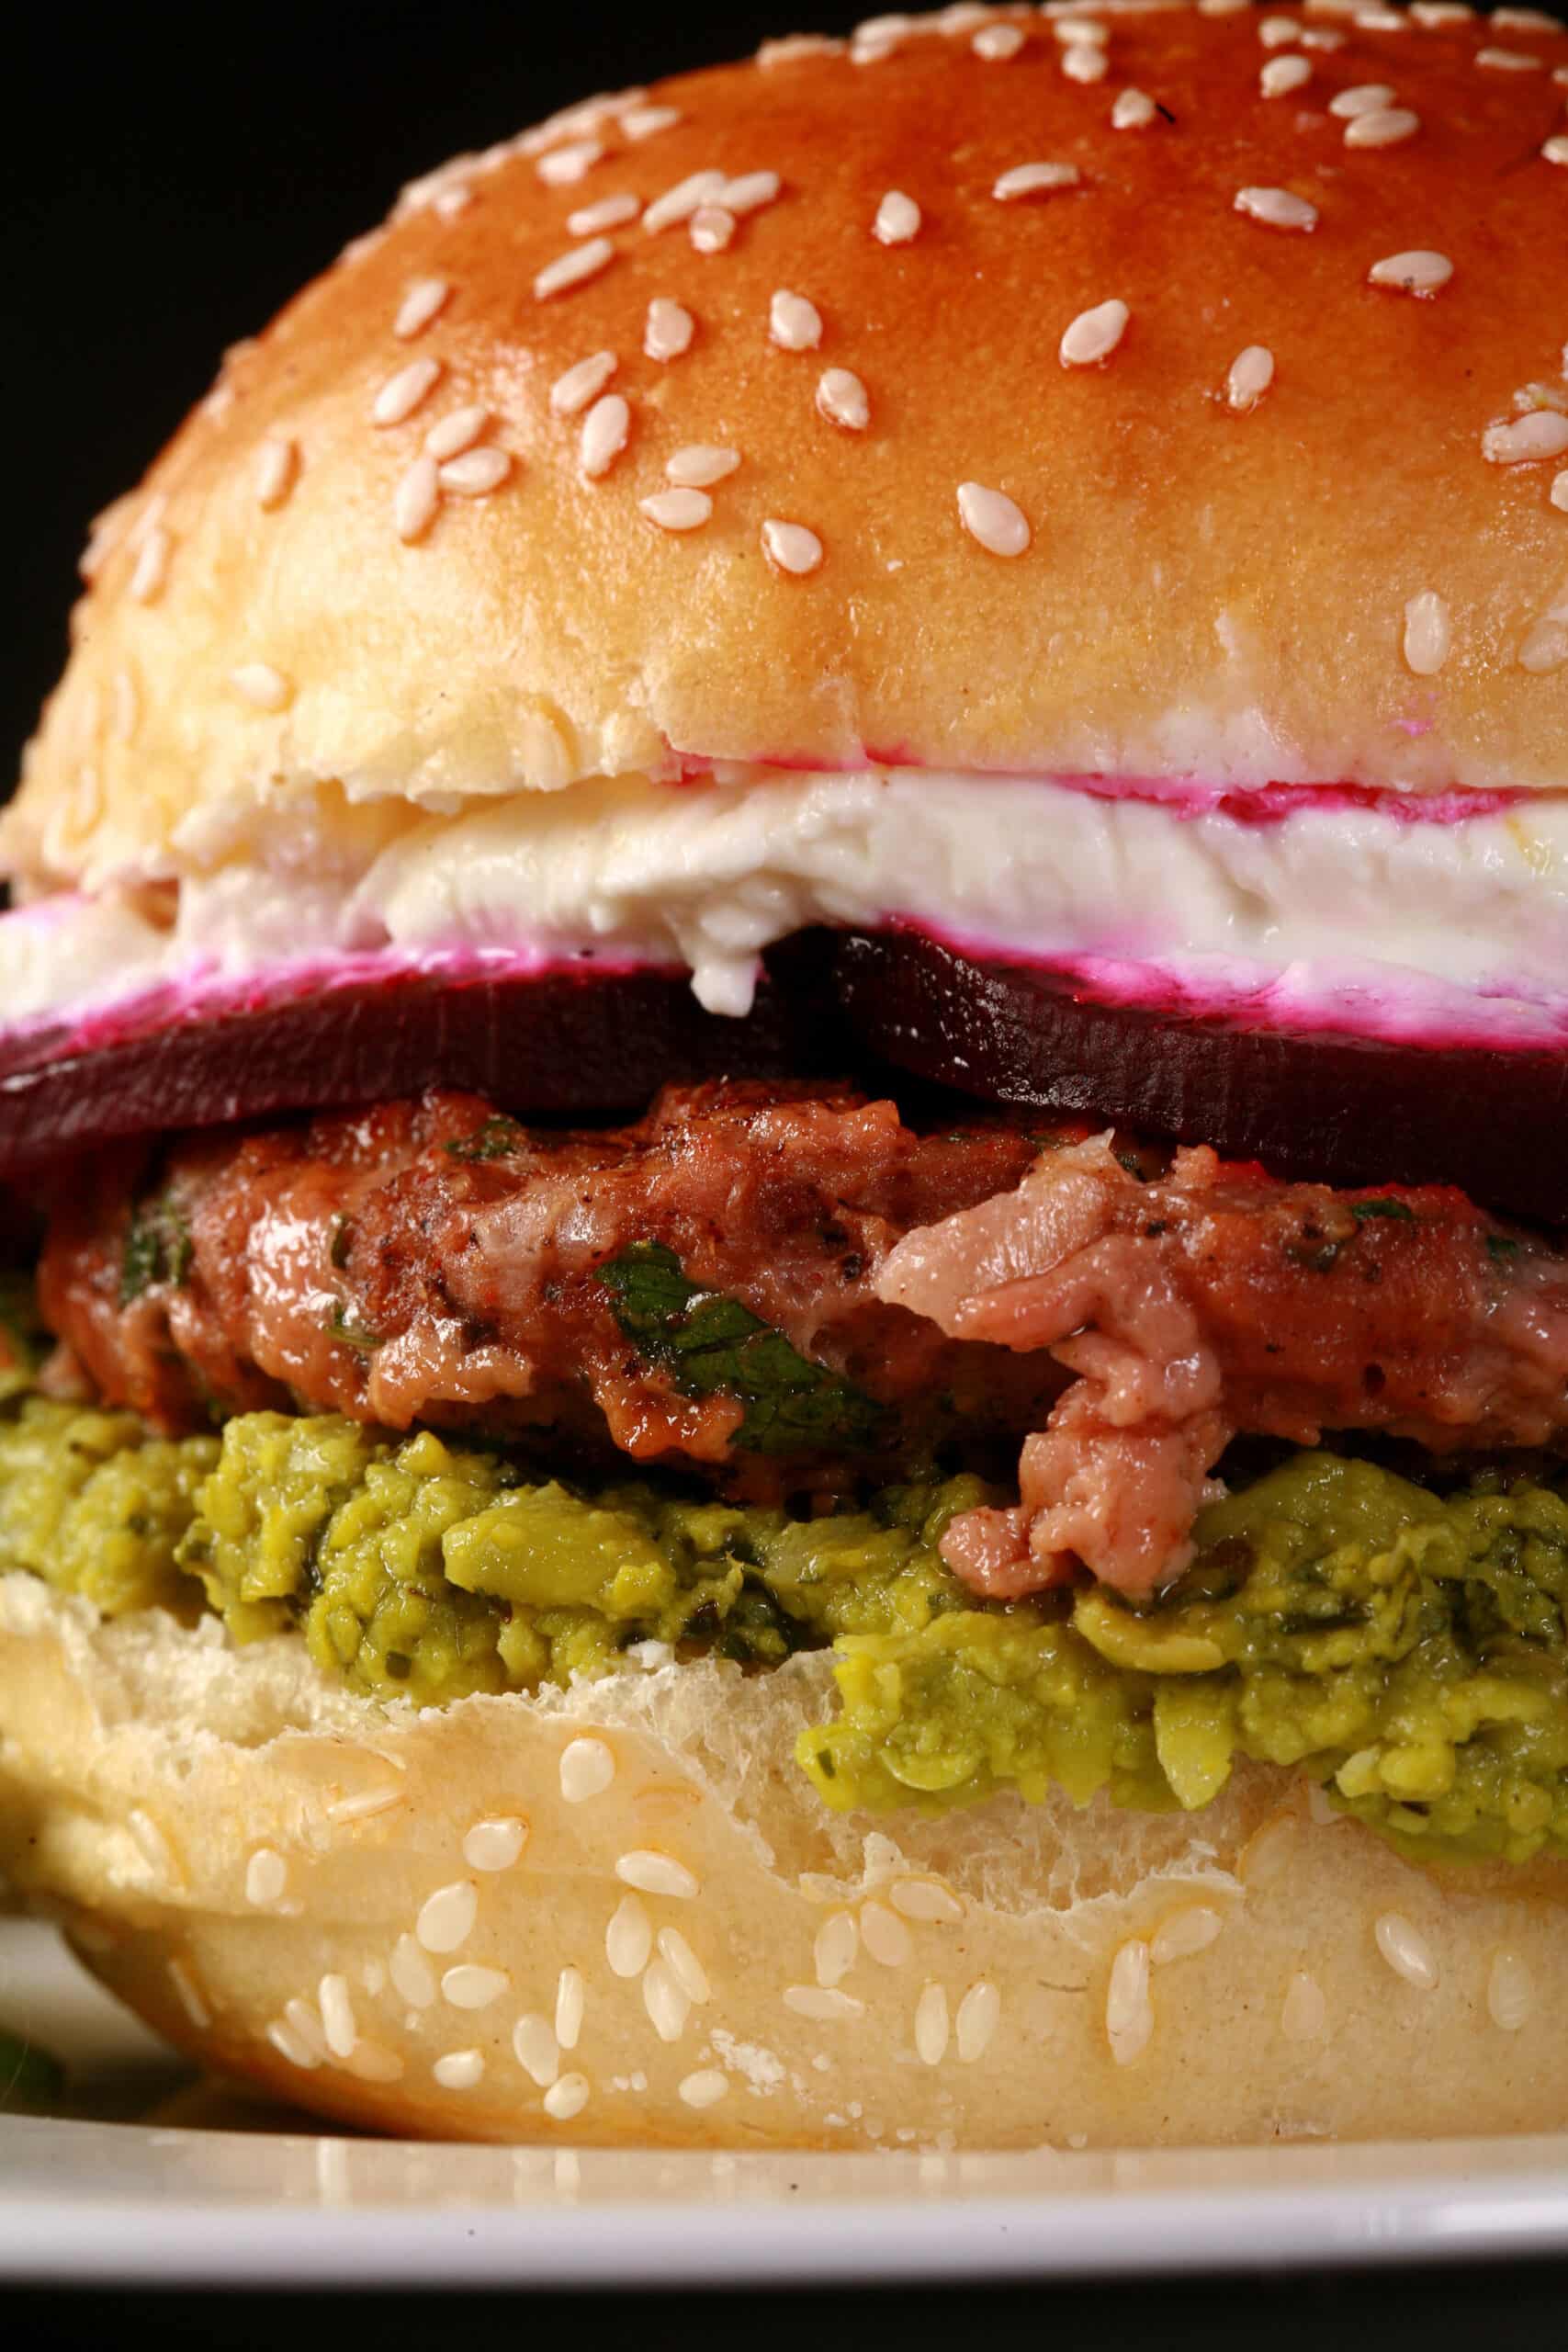 A Middle eastern spiced beyond burger with pea hummus, beet slices, and goat cheese, on a sesame bun.